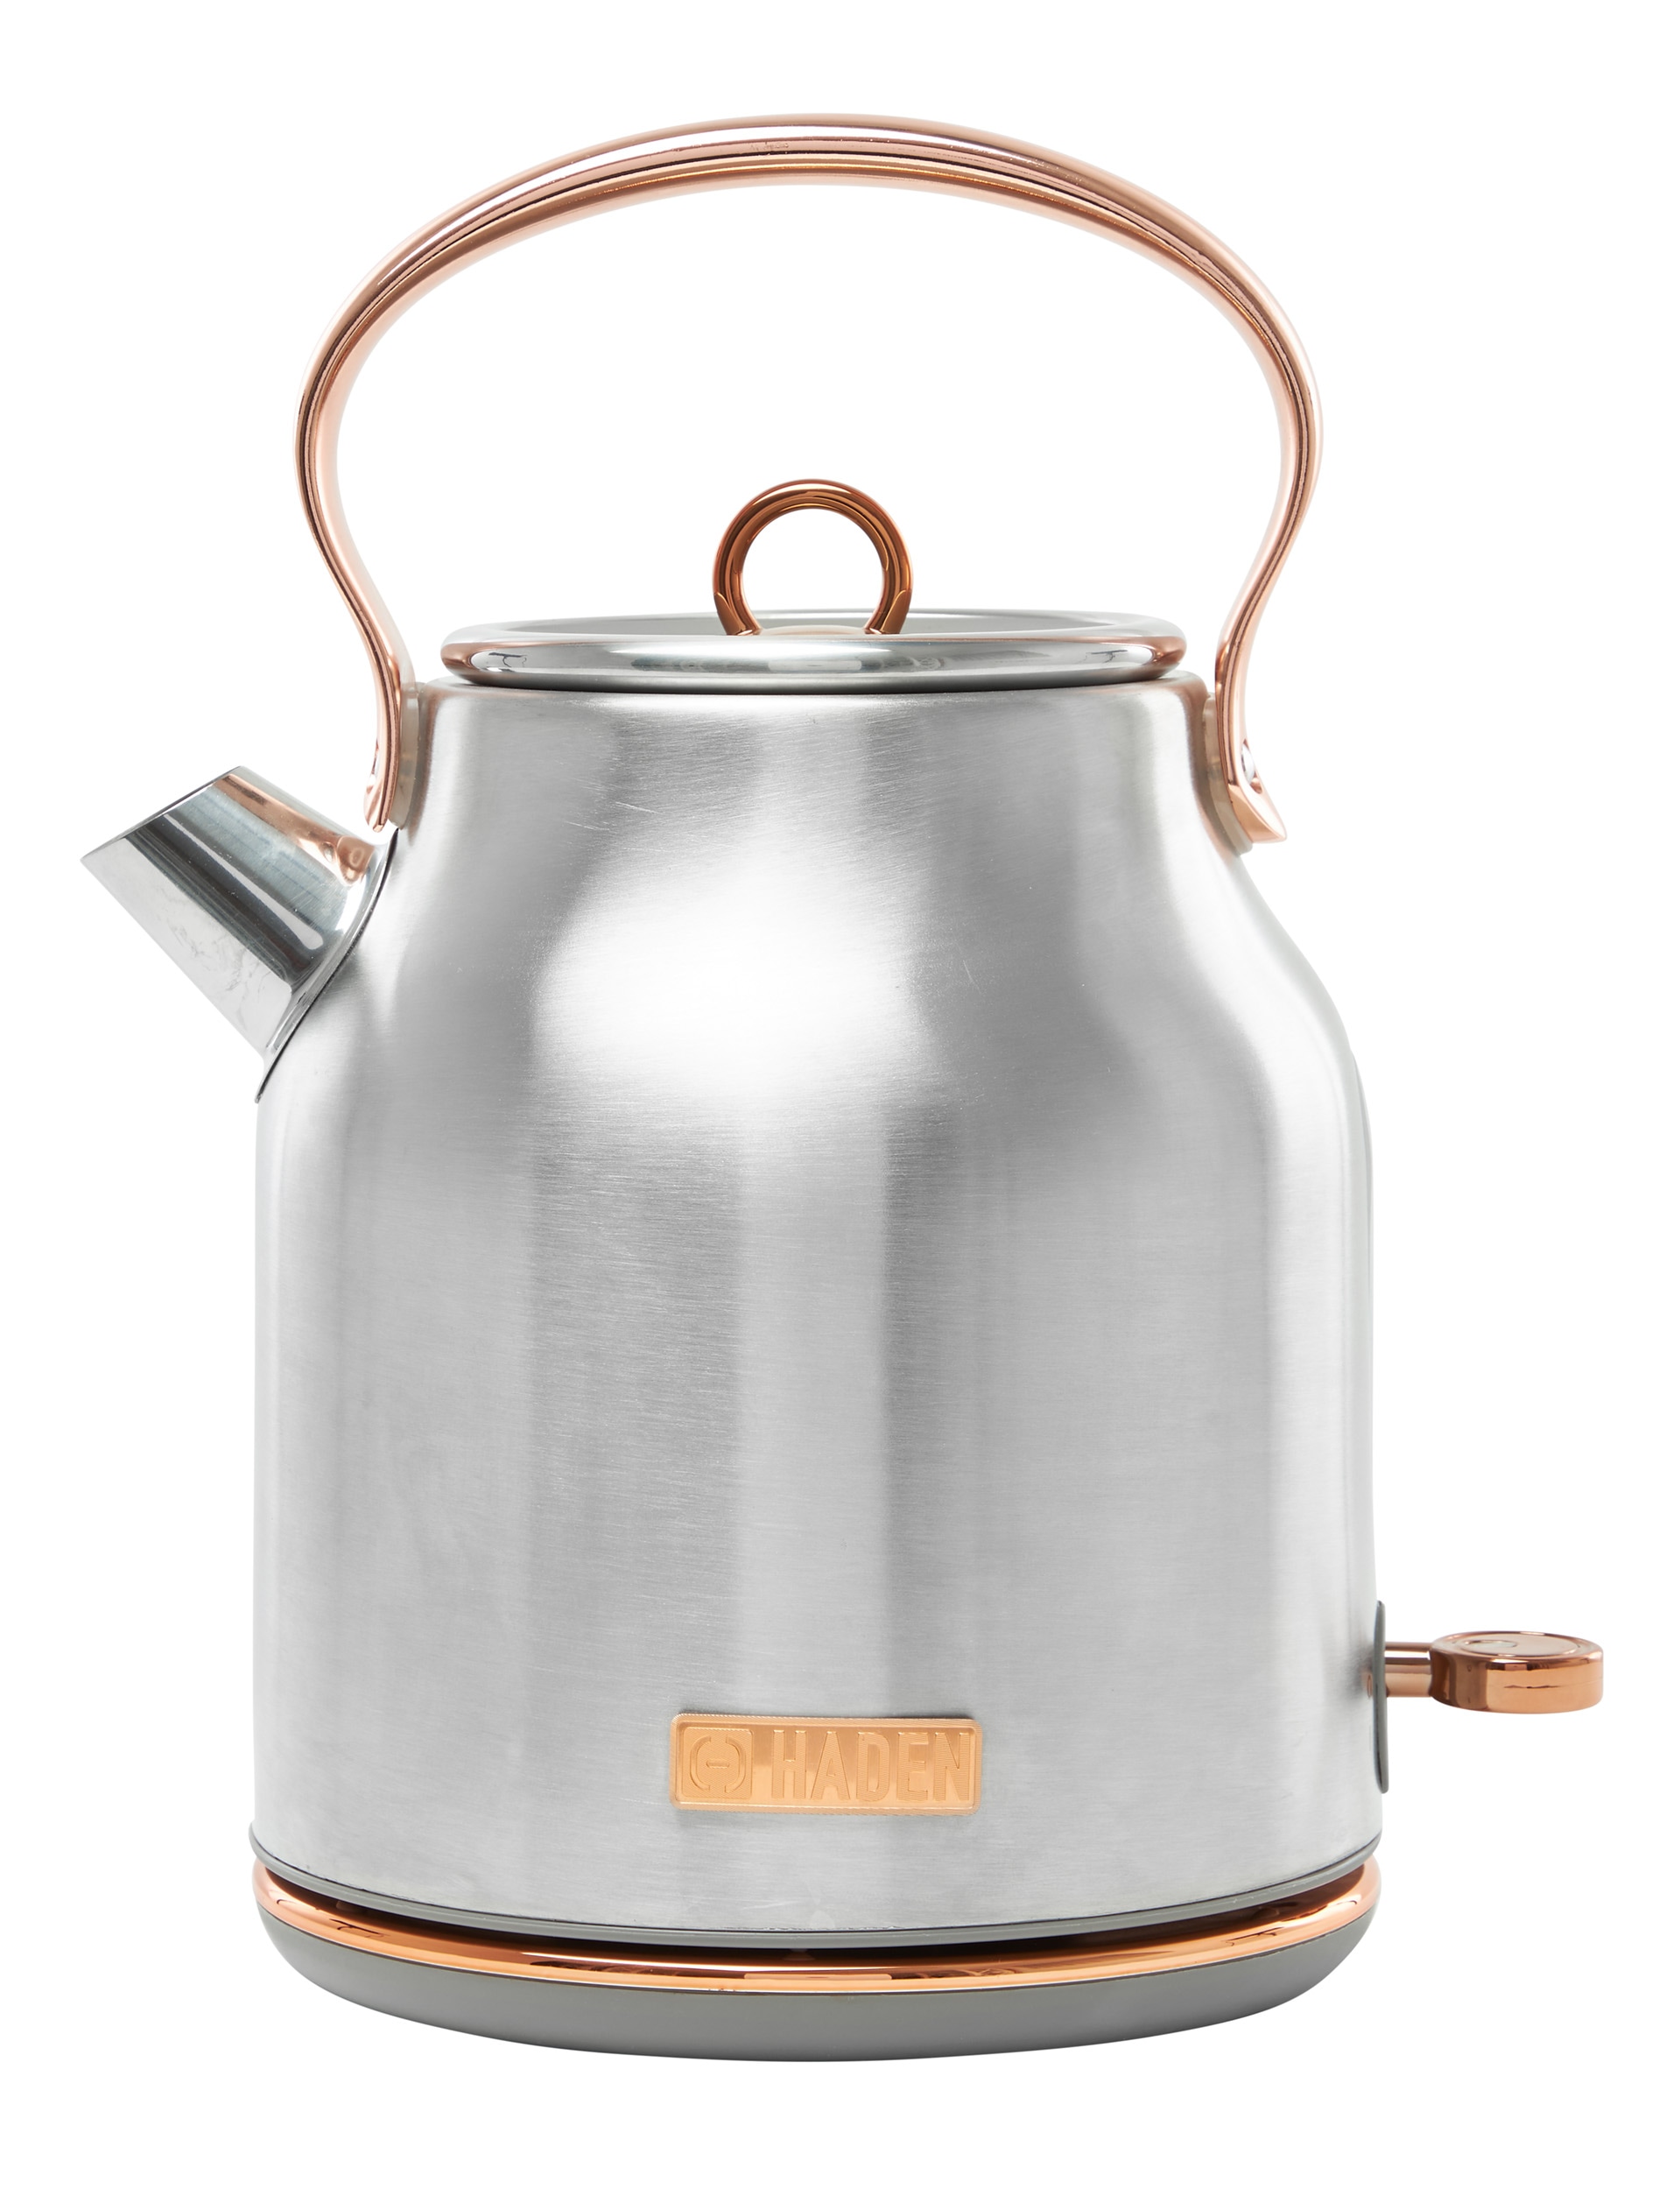  Salton GK1758 Temperature Control 1.7L with Tea Steeper  Electric Kettle, Stainless Steel, Glass: Home & Kitchen